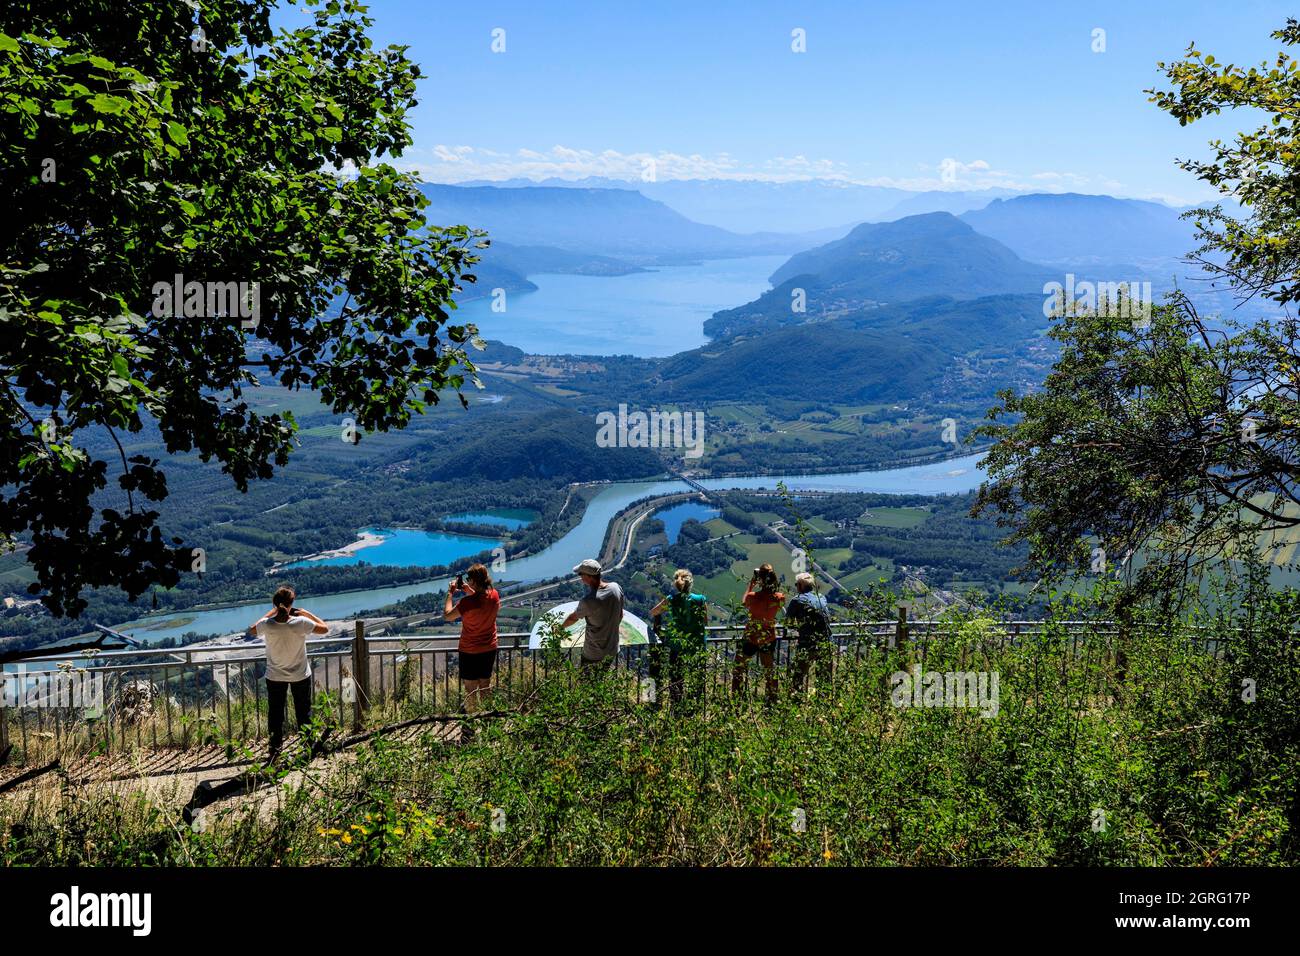 France, Ain, Culoz, Rhone river, Bourget lake in the background, tourists on the Grand Colombier, belvedere Stock Photo